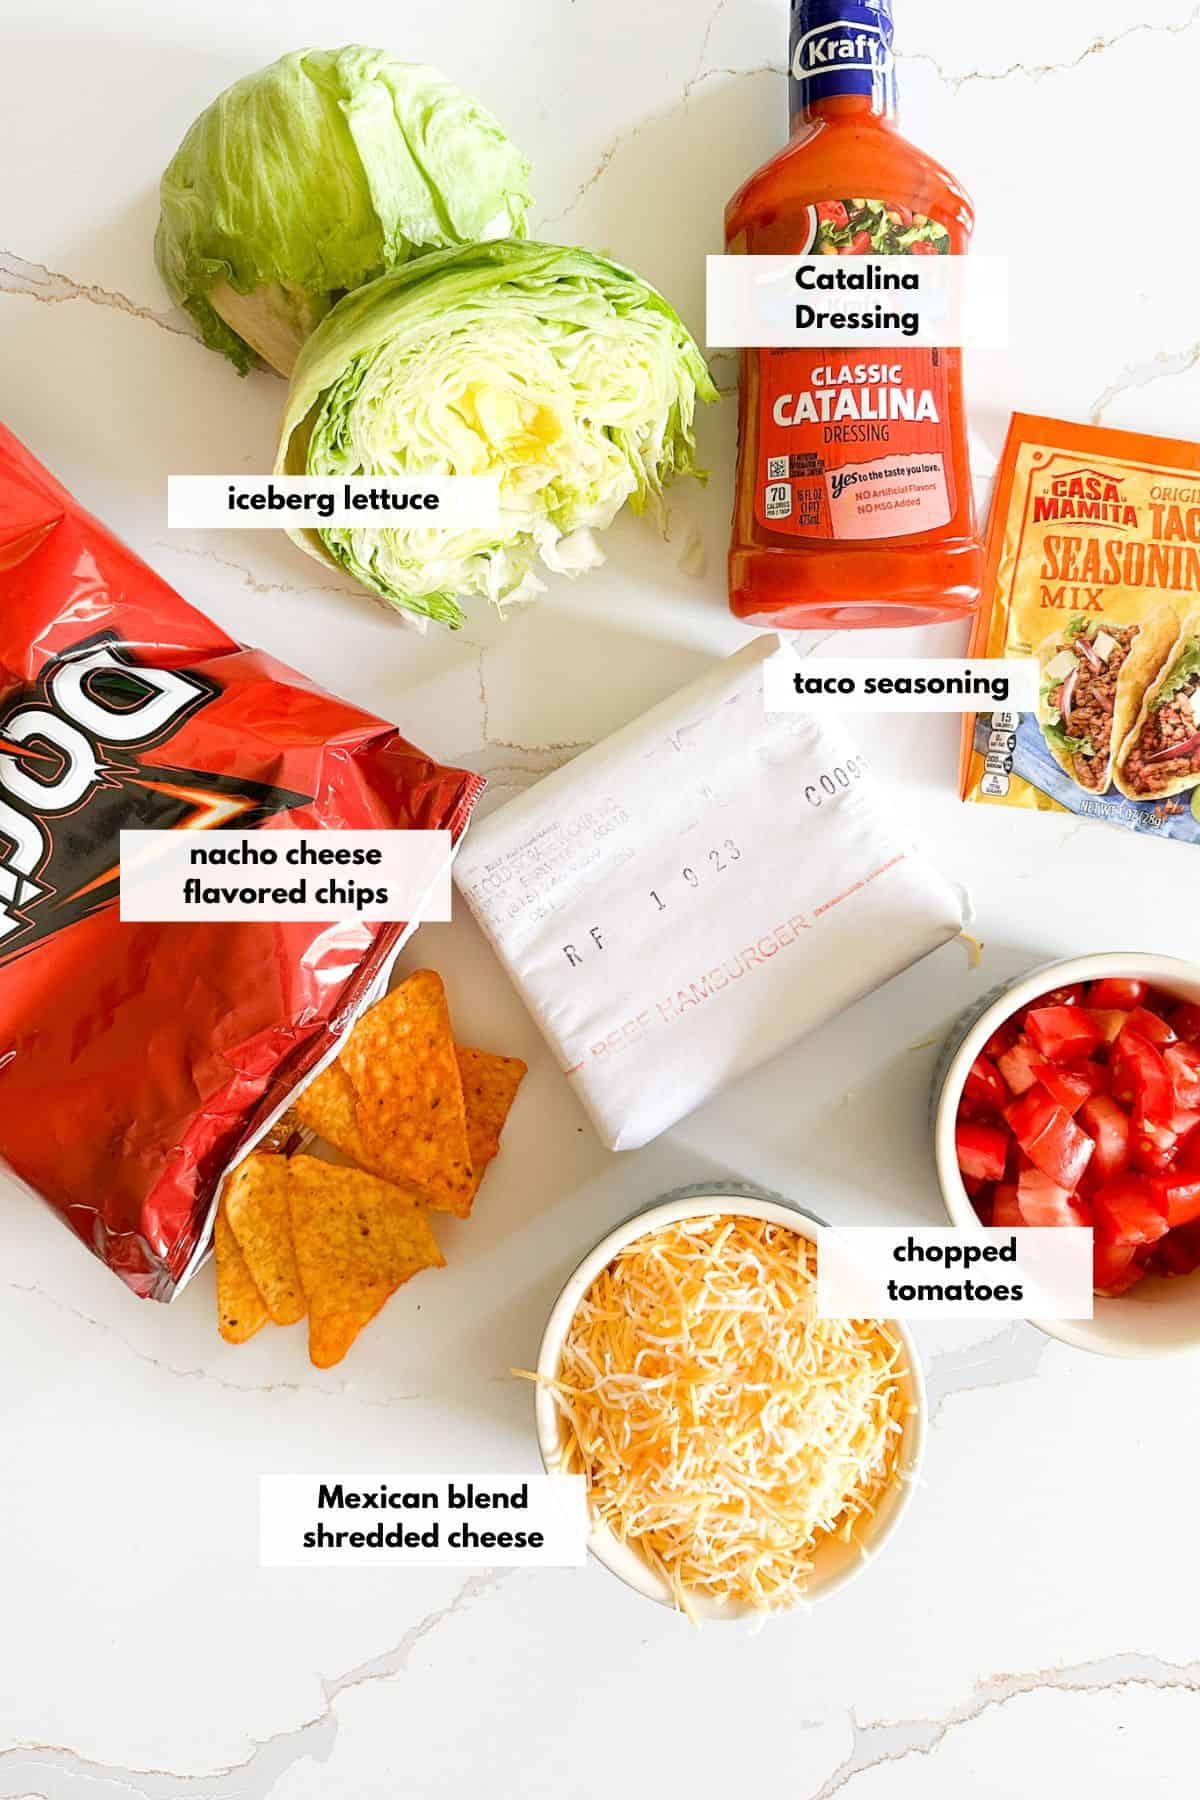 Ingredients to make this taco salad are catalina dressing, shredded cheese, chopped tomatoes, taco seasoning, iceberg lettuce and ground beef.